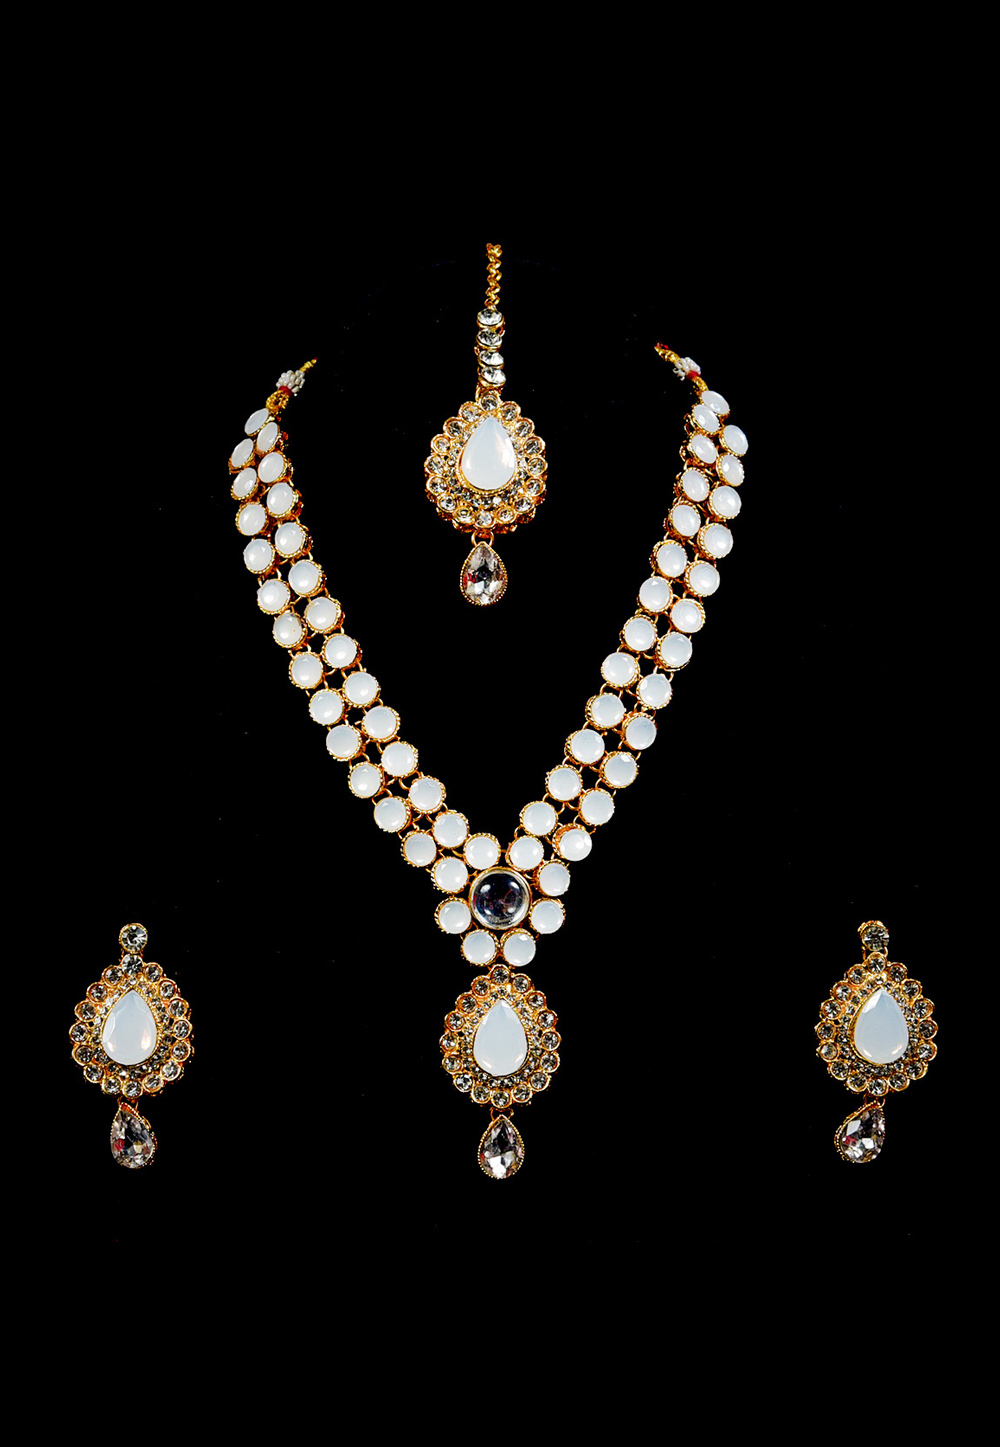 Off White Alloy Austrian Diamond Necklace Set With Earrings and Maang Tikka 247926